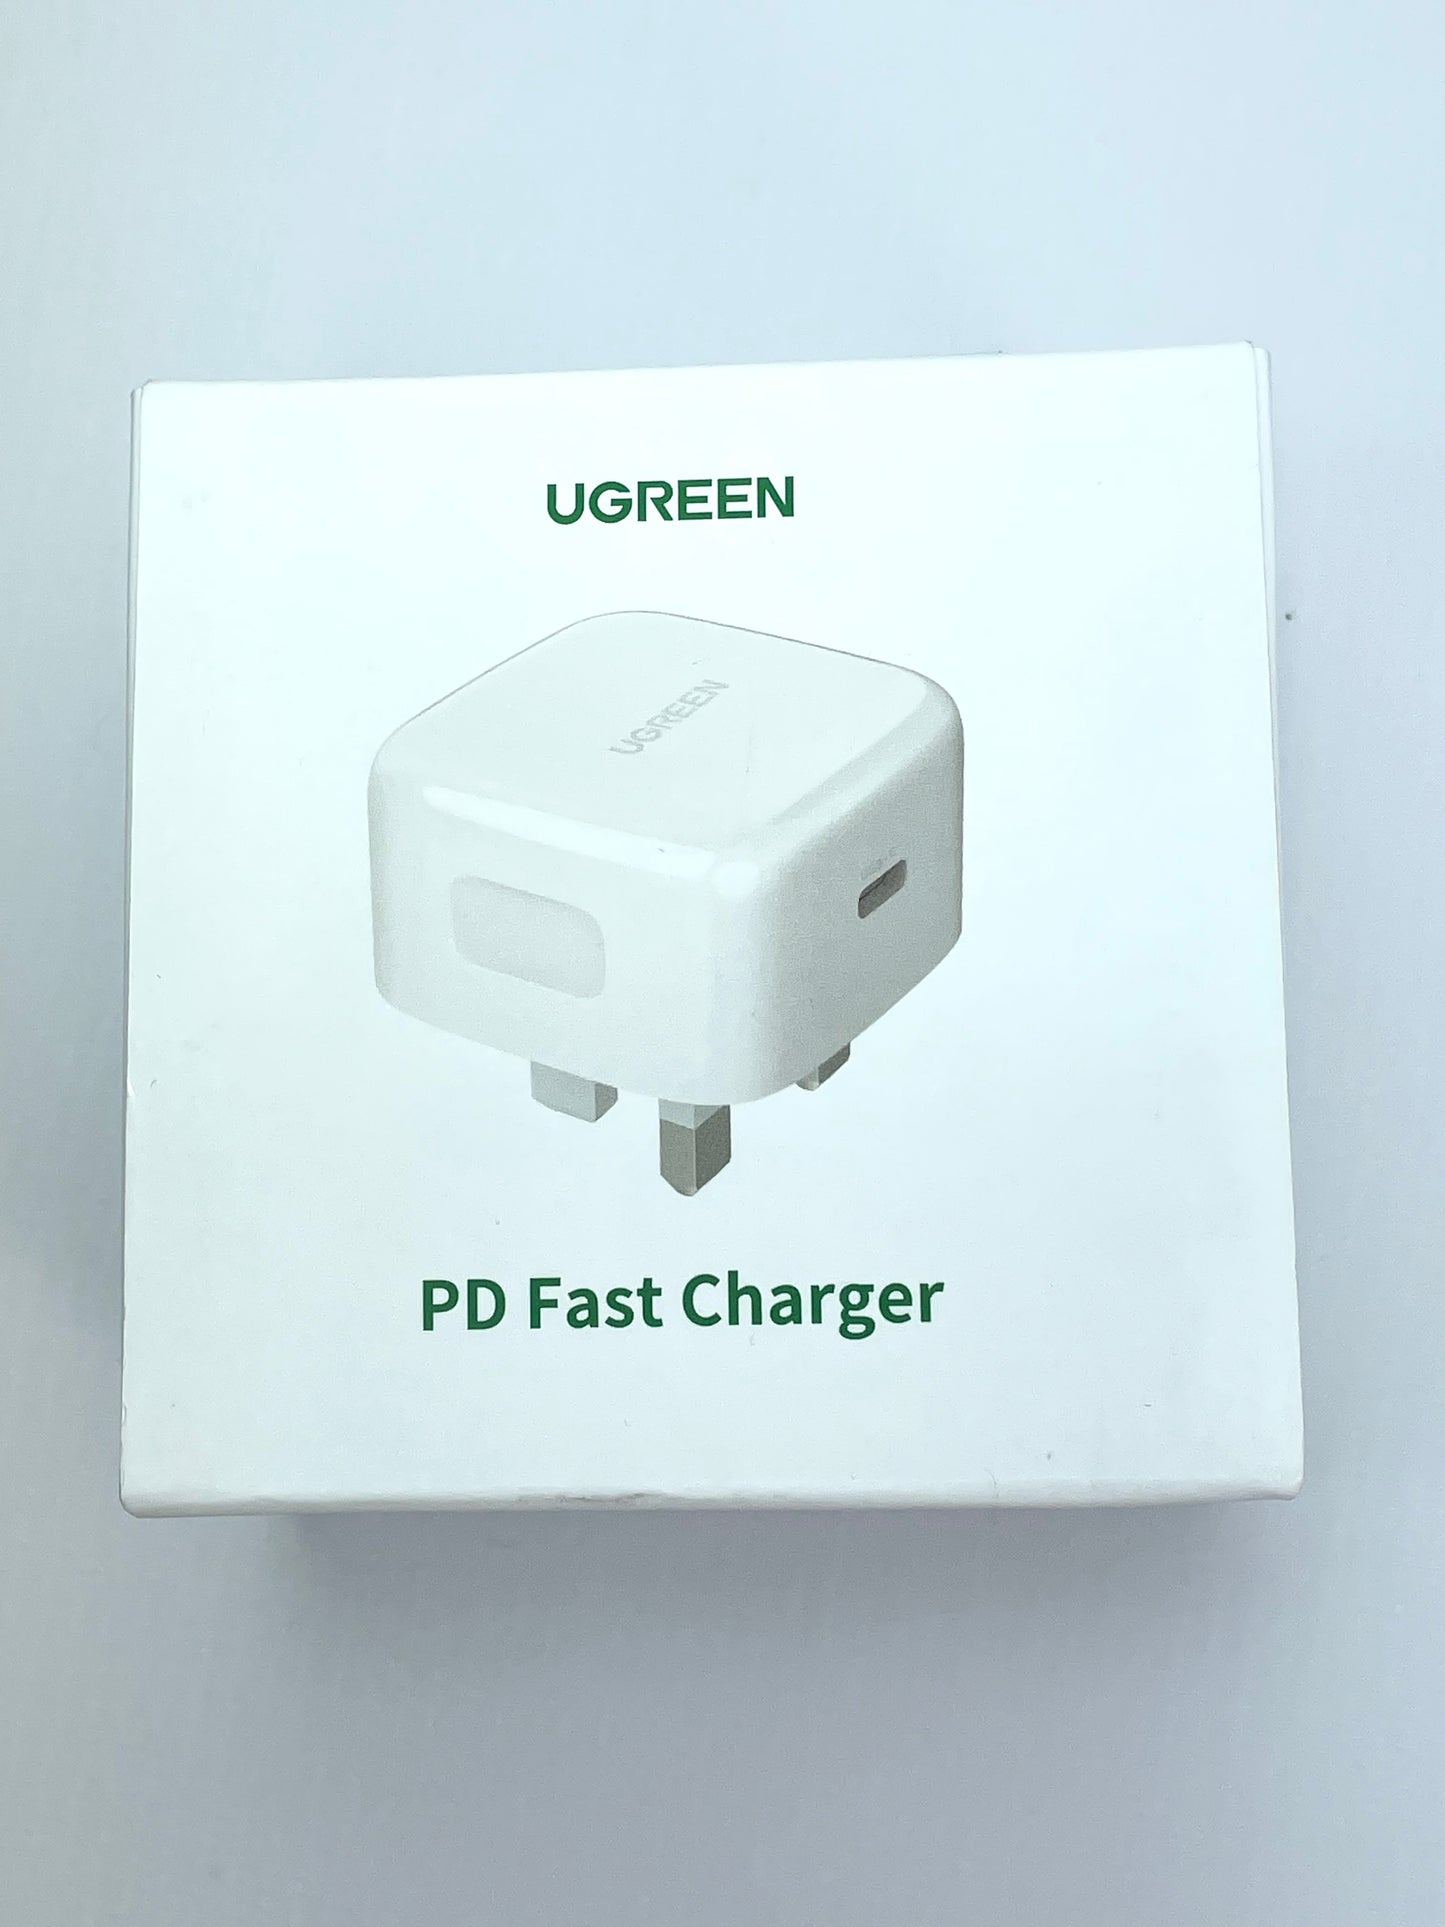 Ugreen PD Fast Charger 20W Plug in White